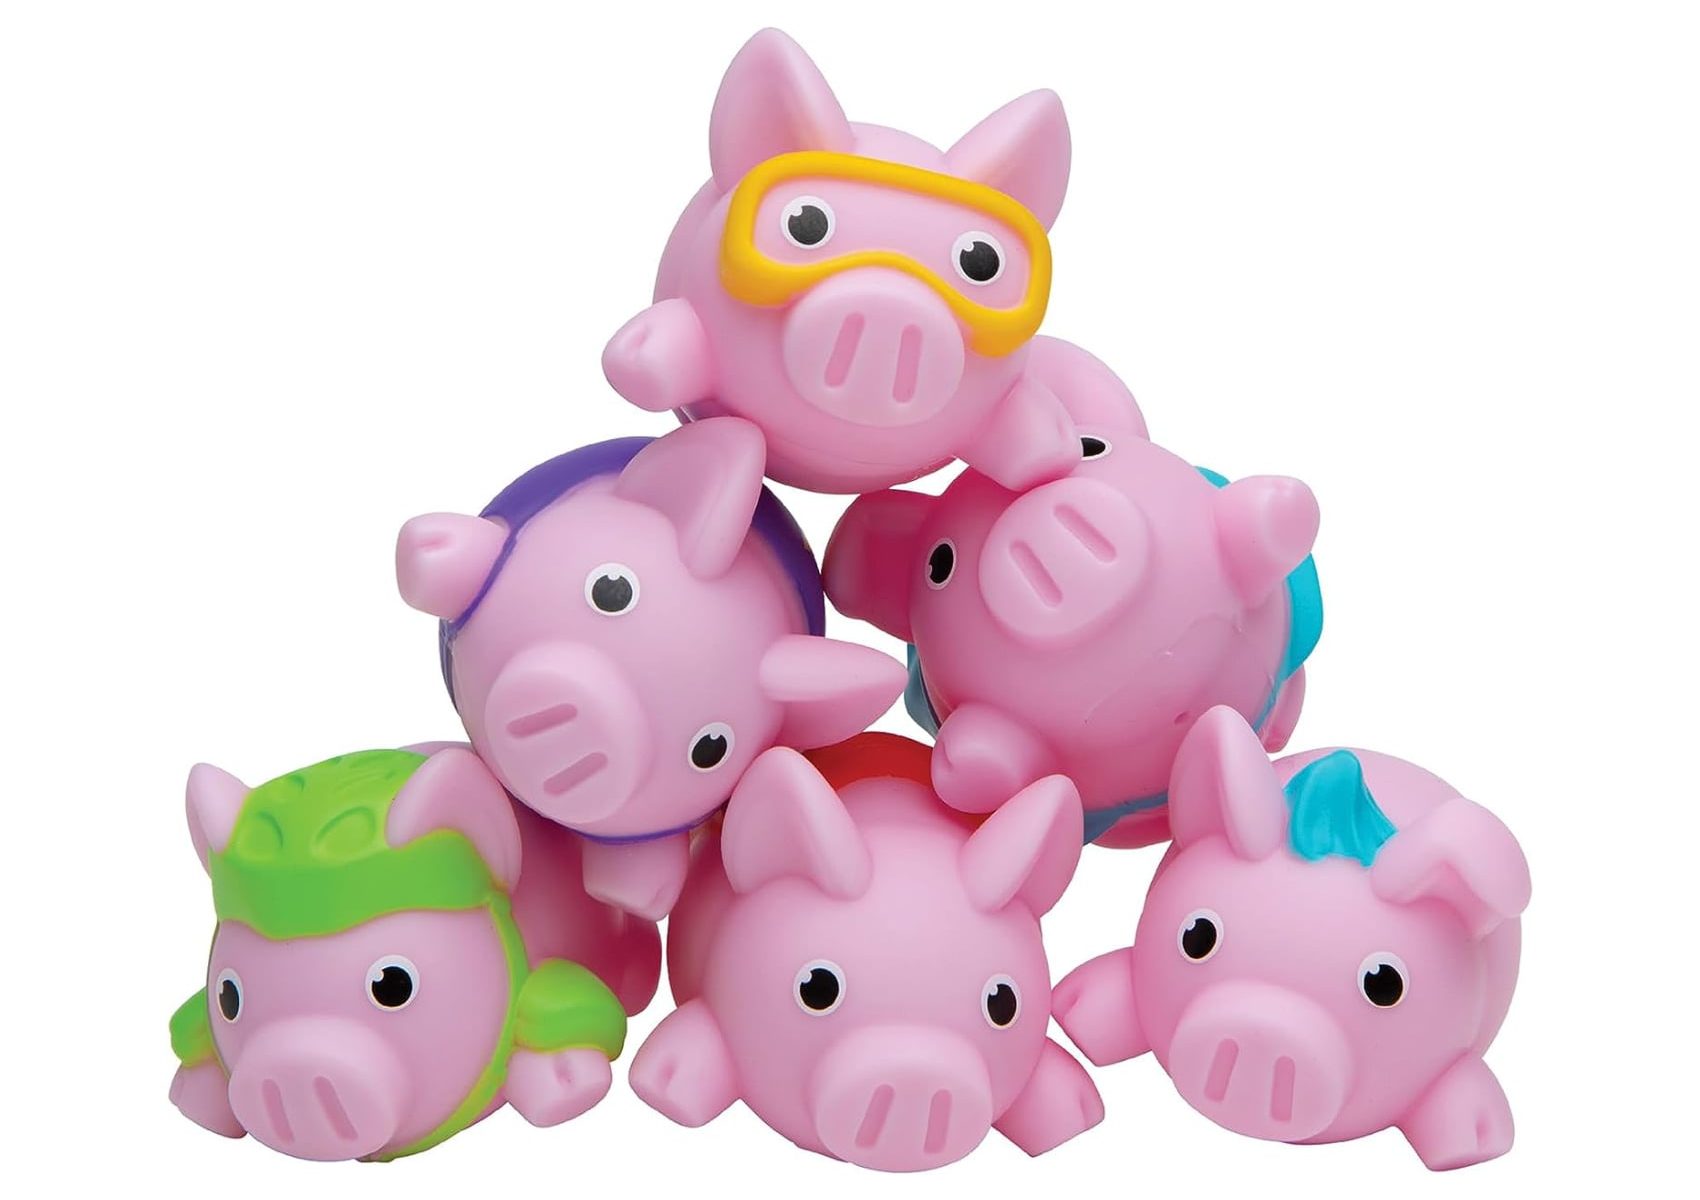 stack of six pigs from pigs on trampolines game. each pig has a different colorful attribute such as hair or goggles